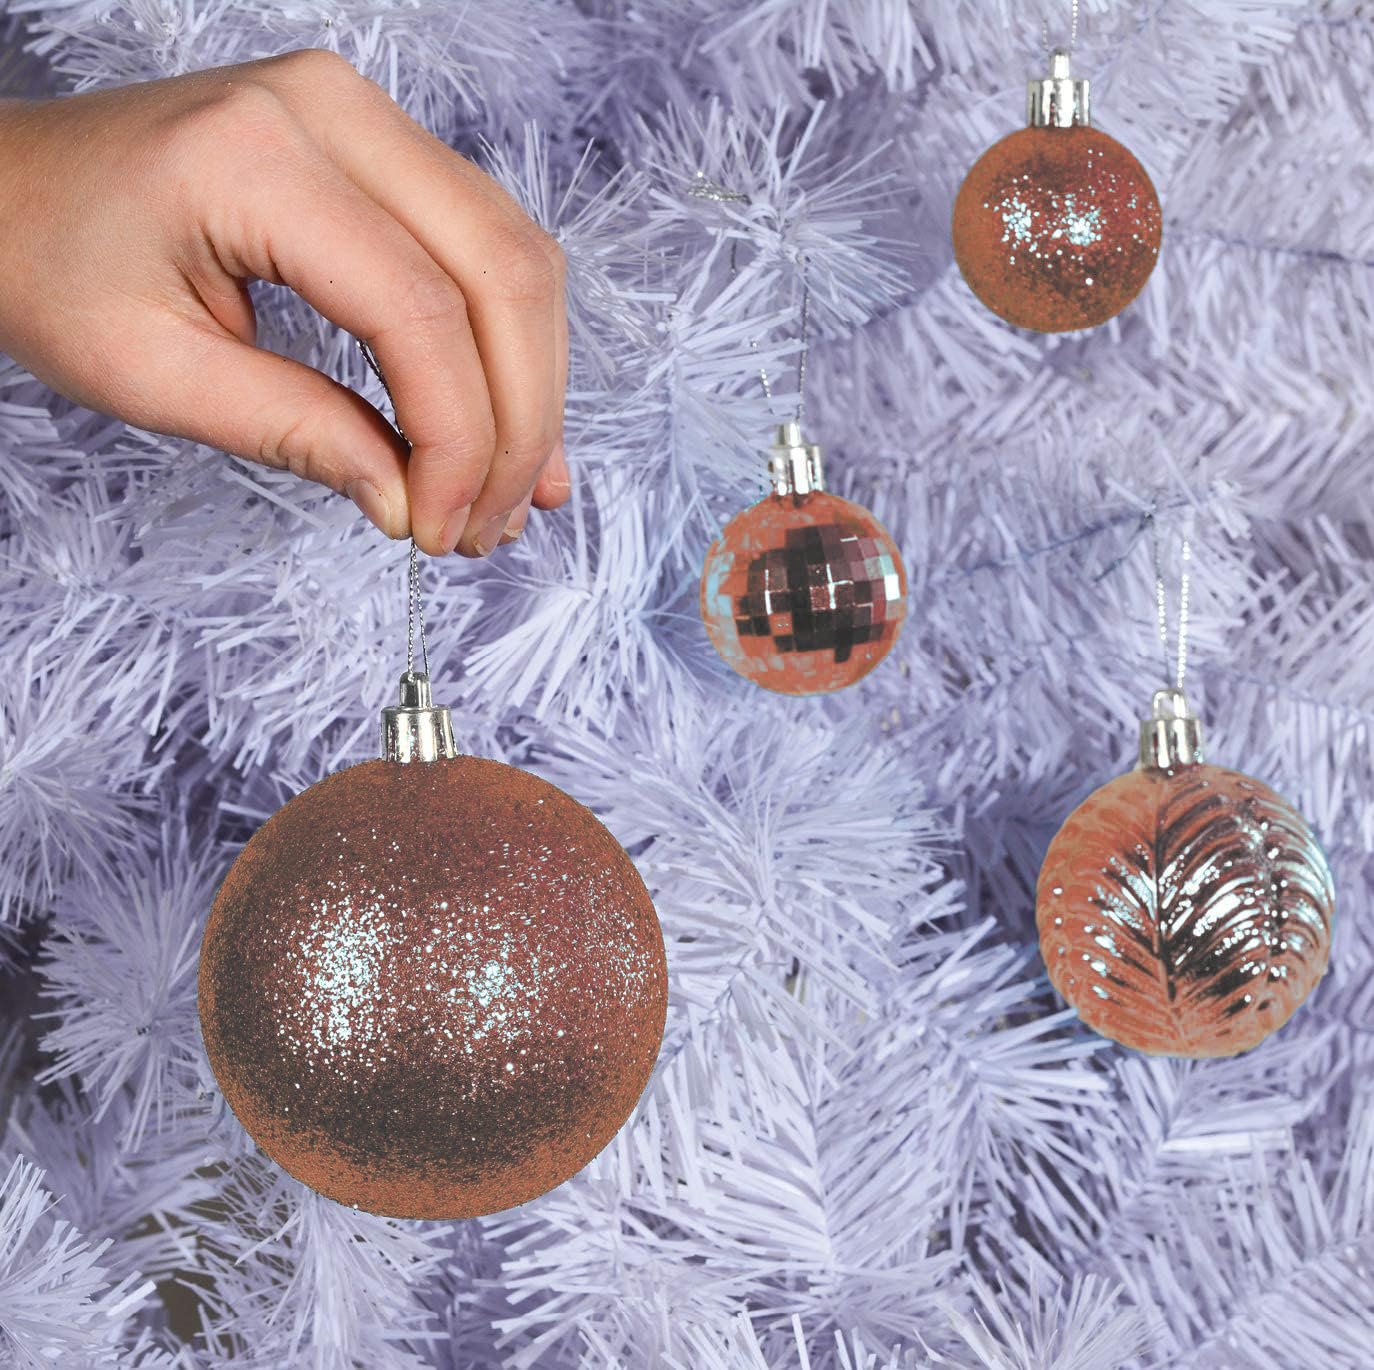 PREXTEX Champagne Christmas Ball Ornaments (36 pcs) - Shatterproof Xmas Tree Decorations with Hanging Loop in 6 Styles and 3 Sizes